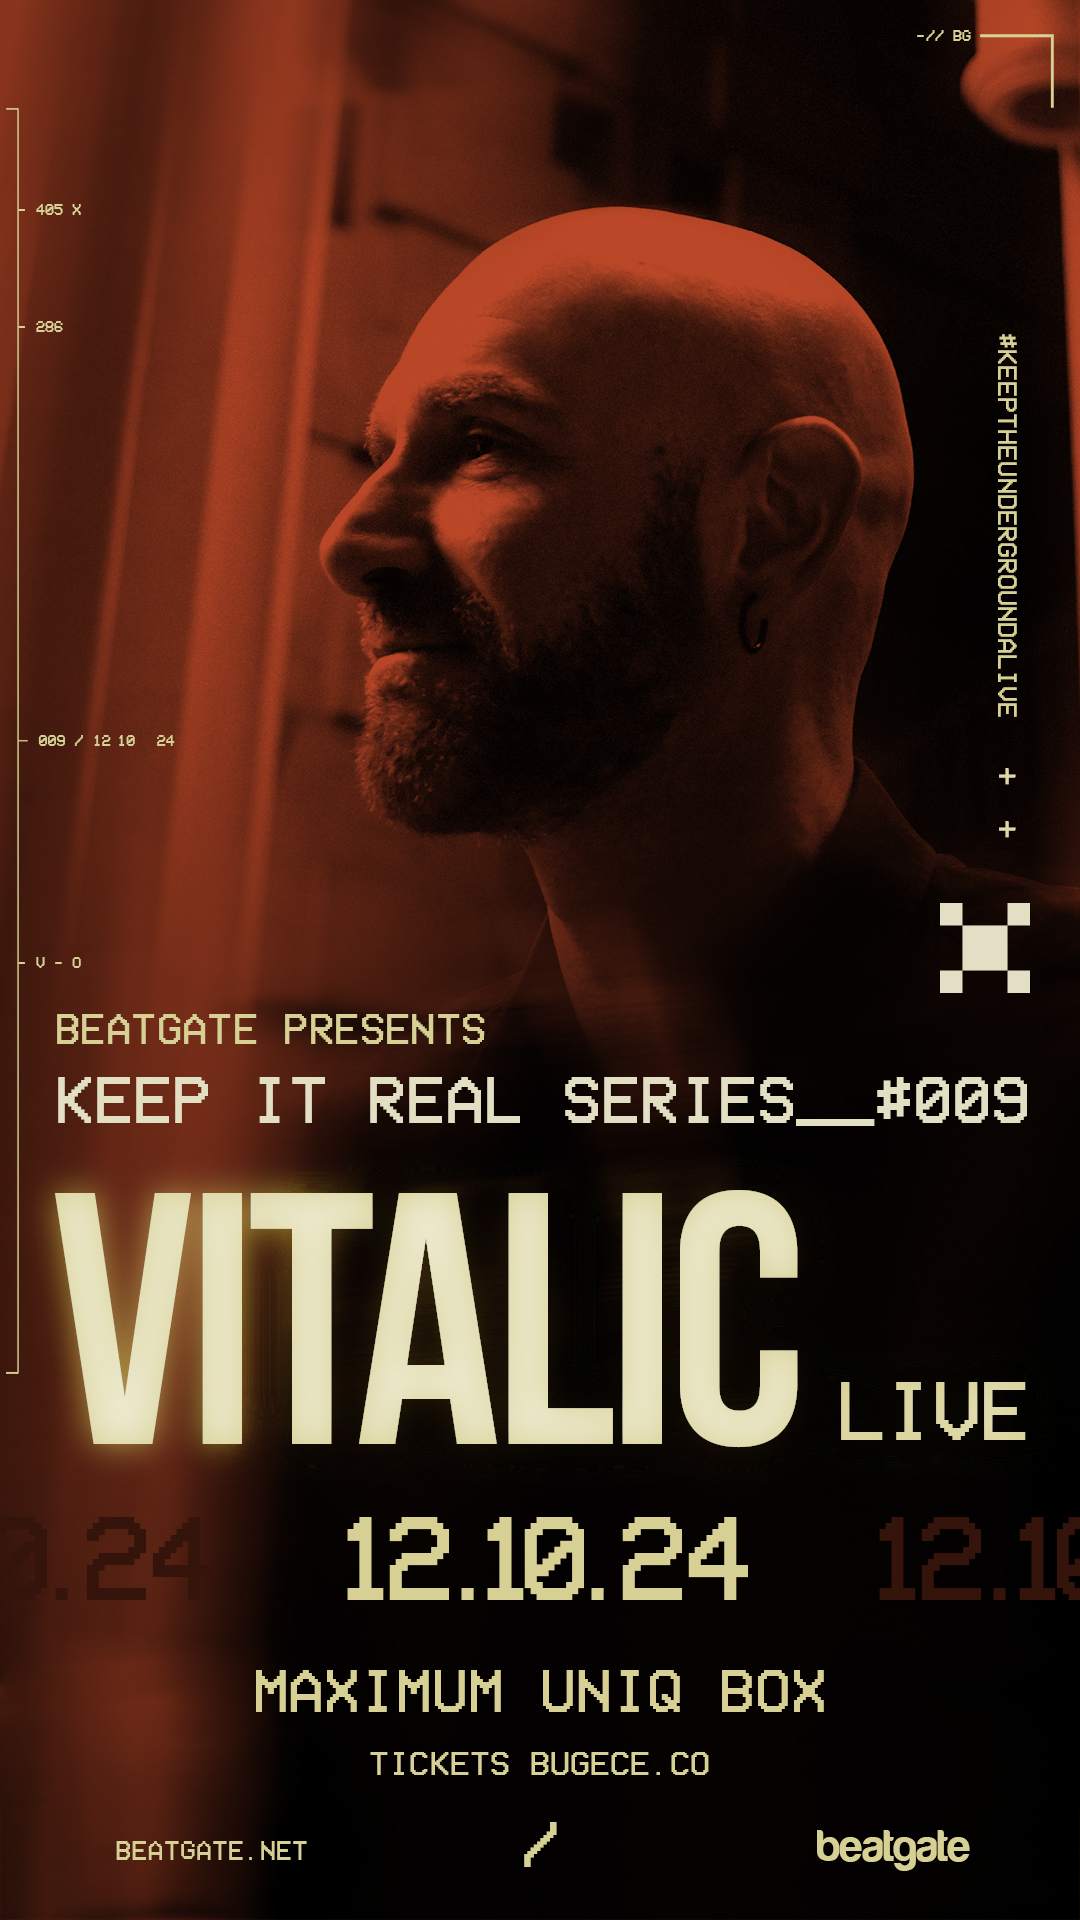 Beatgate with Vitalic (live) - Keep It Real Series #009 - フライヤー裏